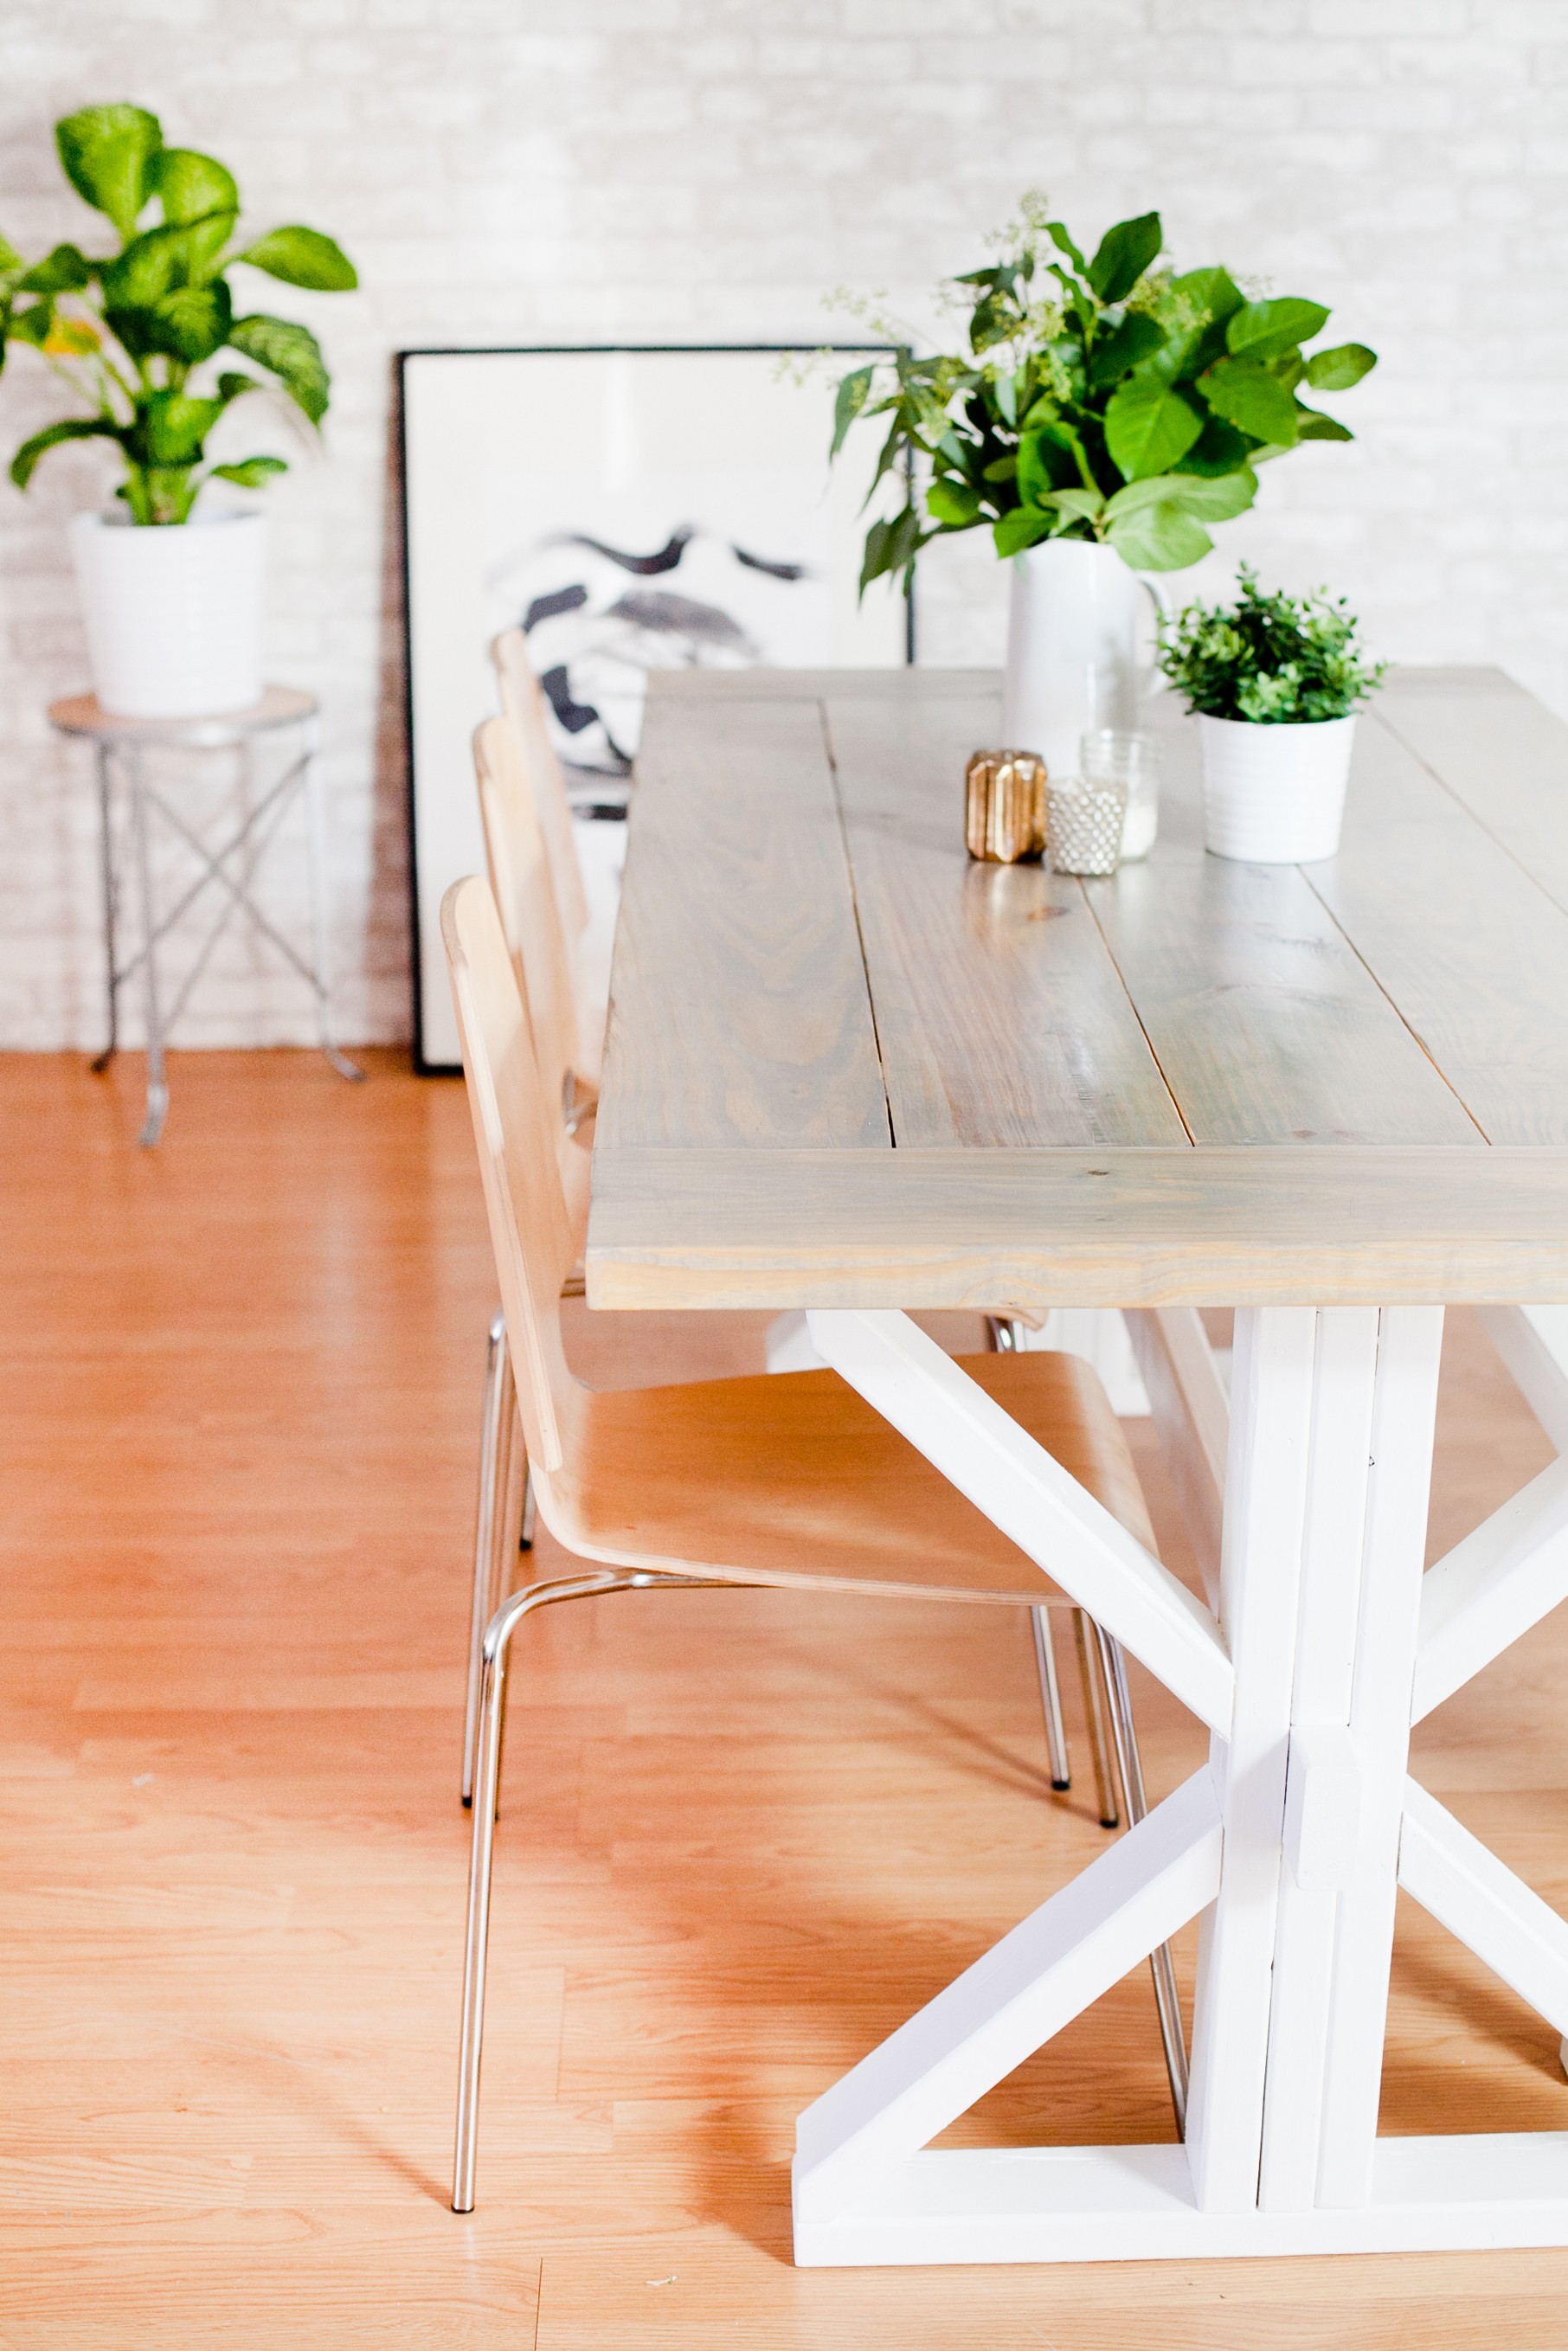 A DIY Farmhouse Table for Kitchen or Dining for under $100. See the full farmhouse table tutorial!